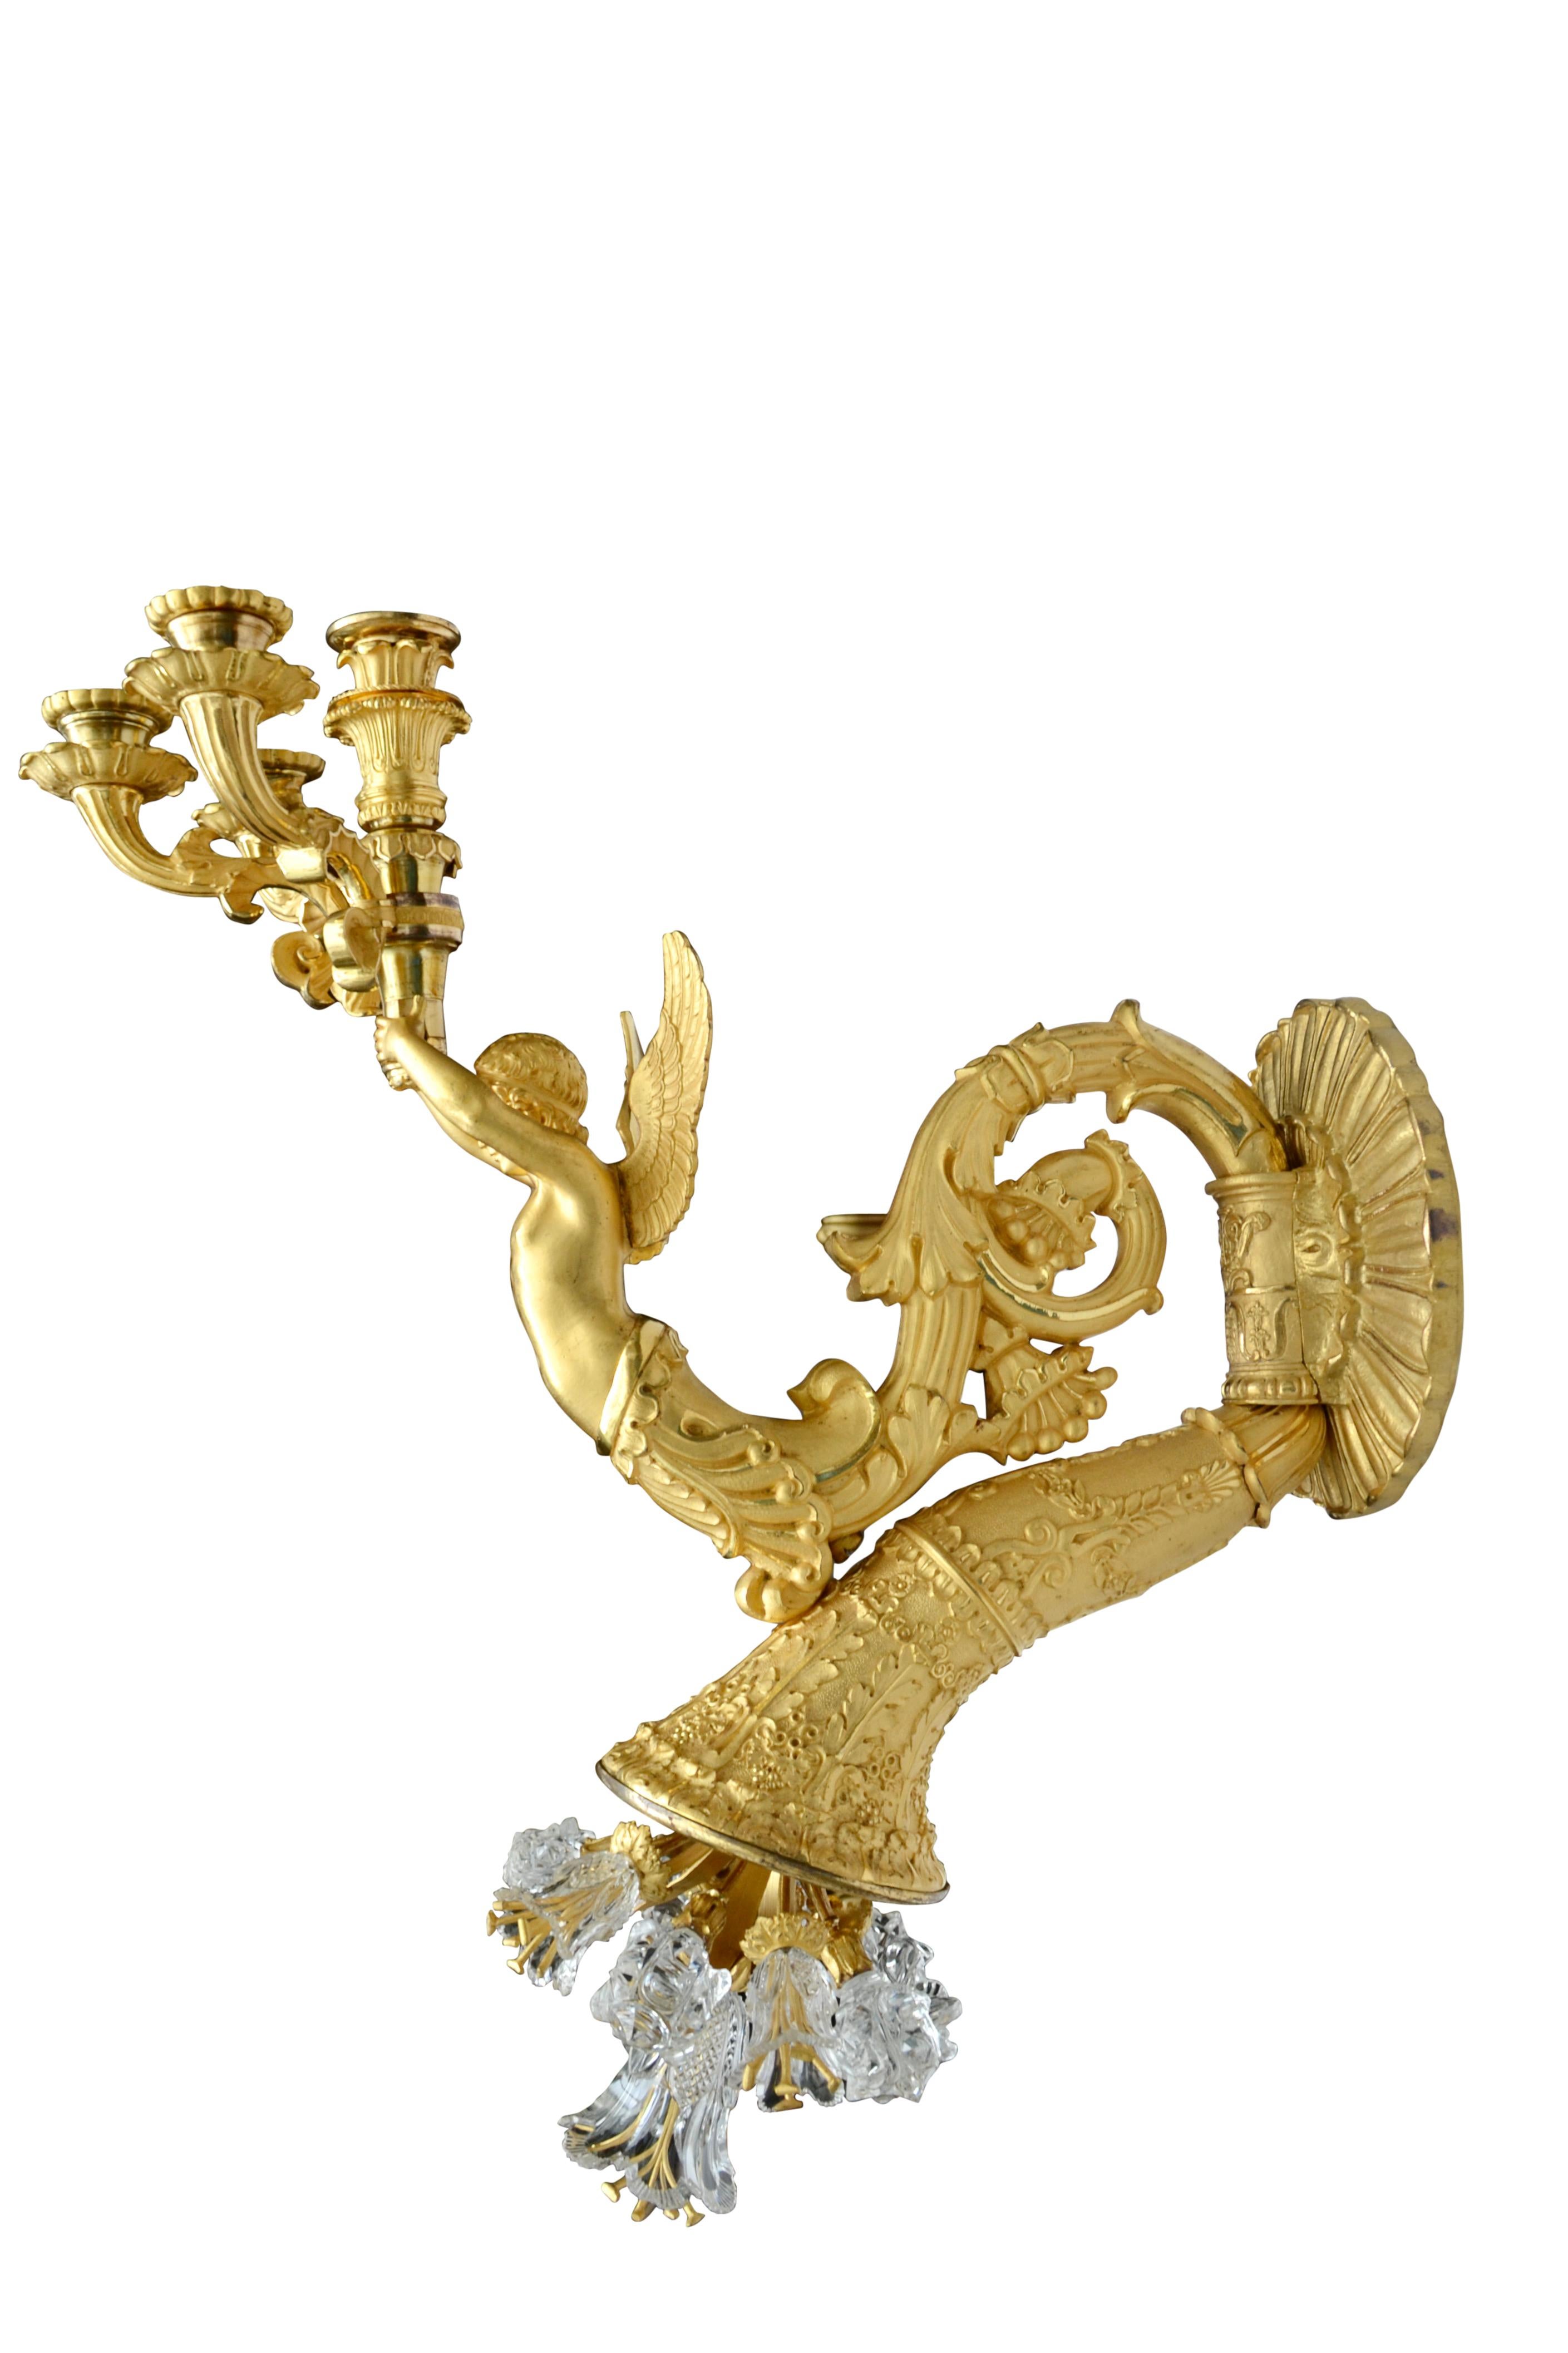 19th Century Large French Empire Gilt Bronze and Crystal Sconce Attributed to Thomire For Sale